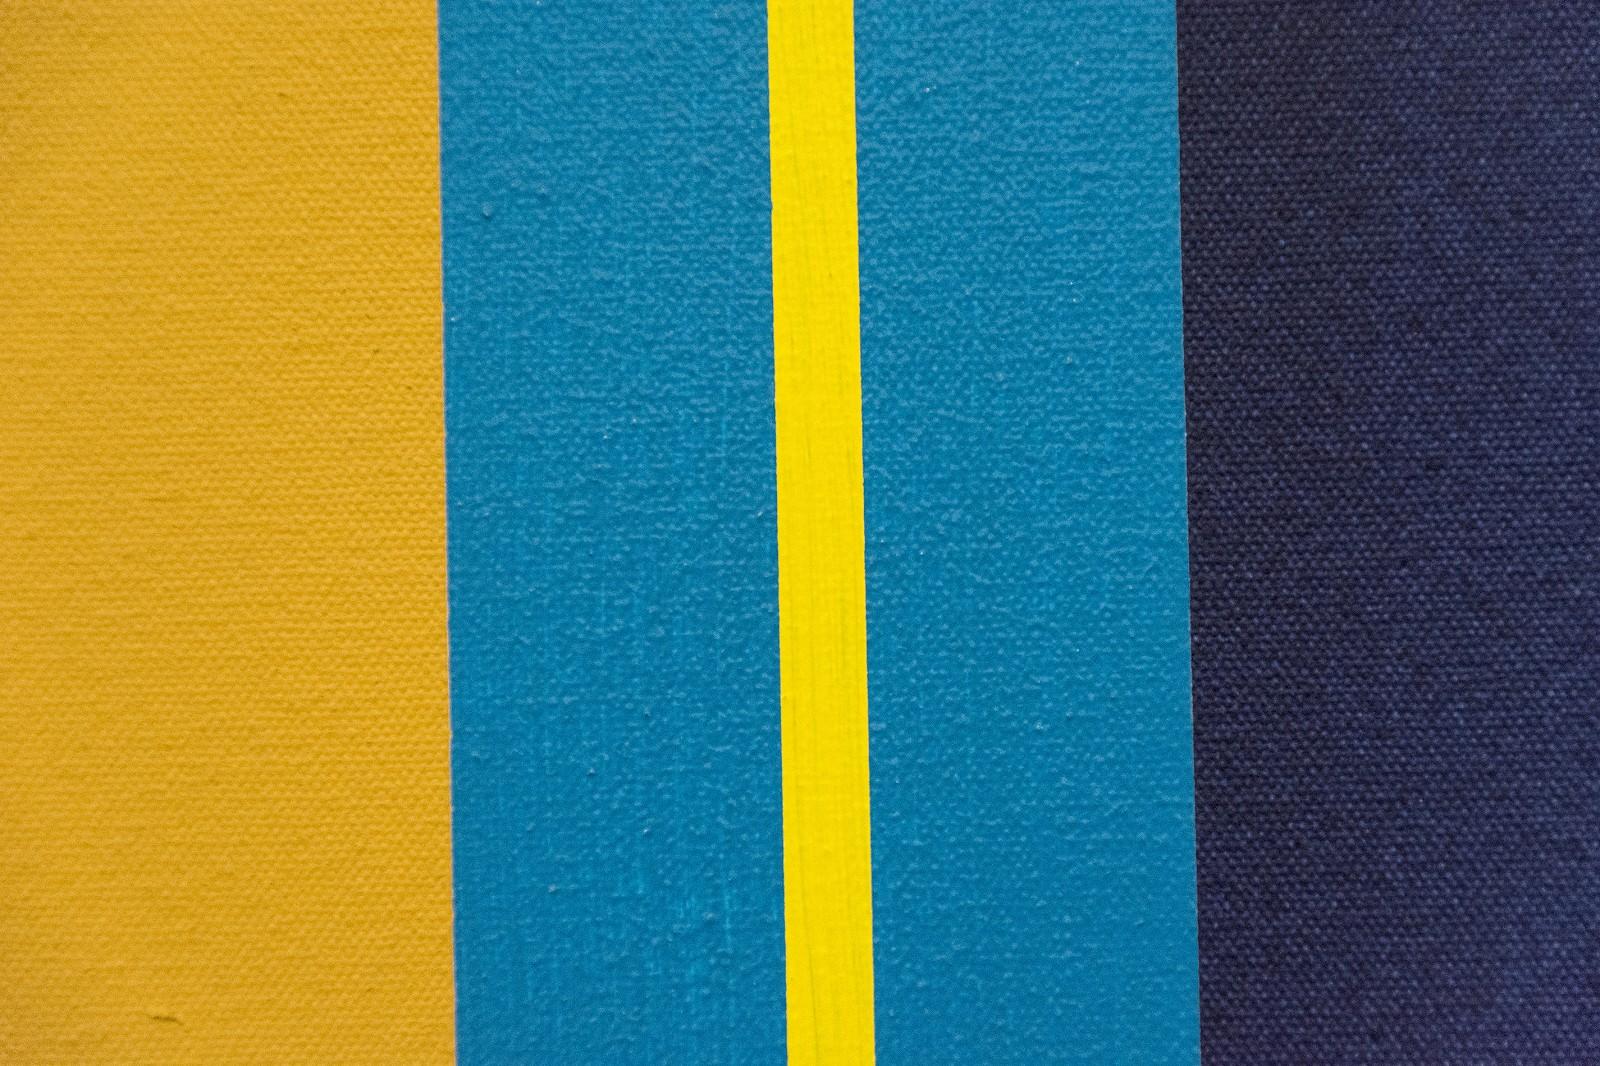 Juxtaposed blocks of navy, orange and canary held by a bar of sky blue create a subtle optical effect in this masterful composition by Milly Ristvedt.

Milly Ristvedt (b. 1942, Kimberley, BC) MA, RCA, began her career in Toronto in 1964 after